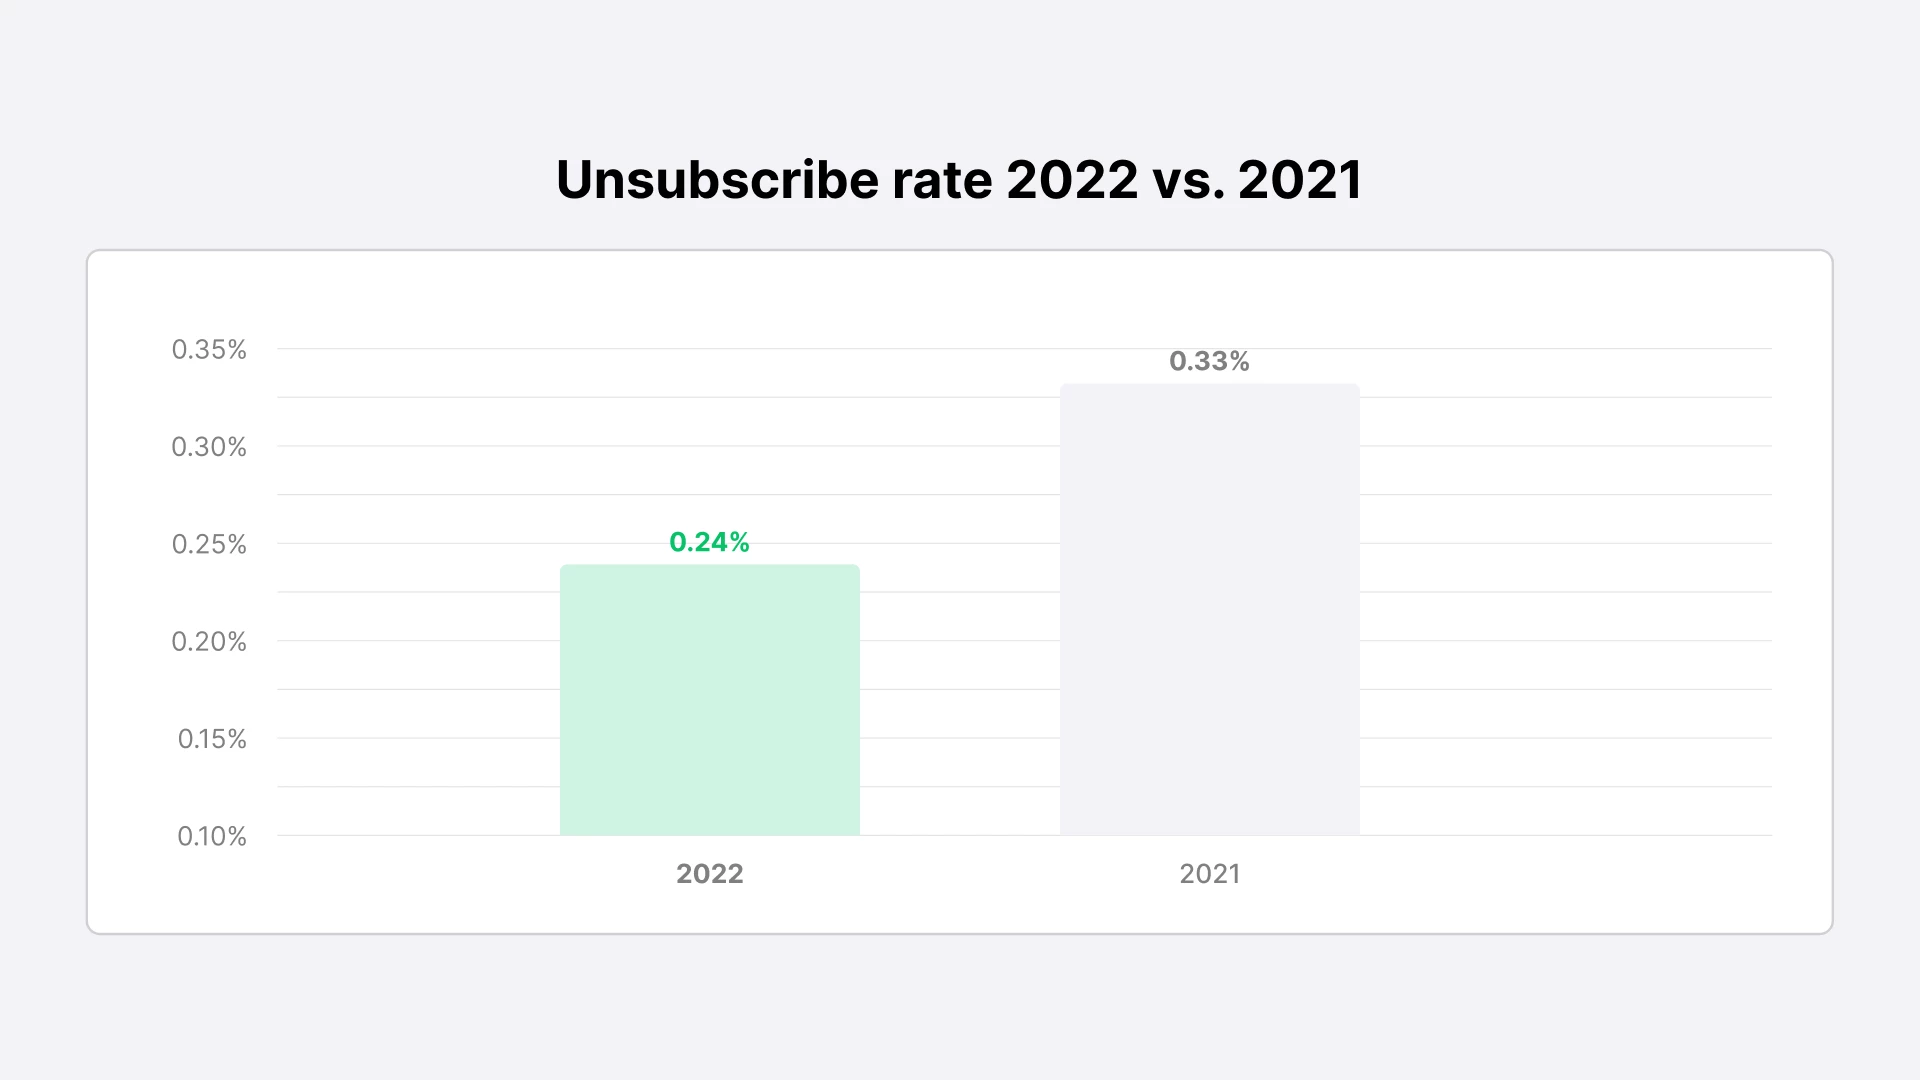 Email unsubscribe rate 2022 vs. 2021